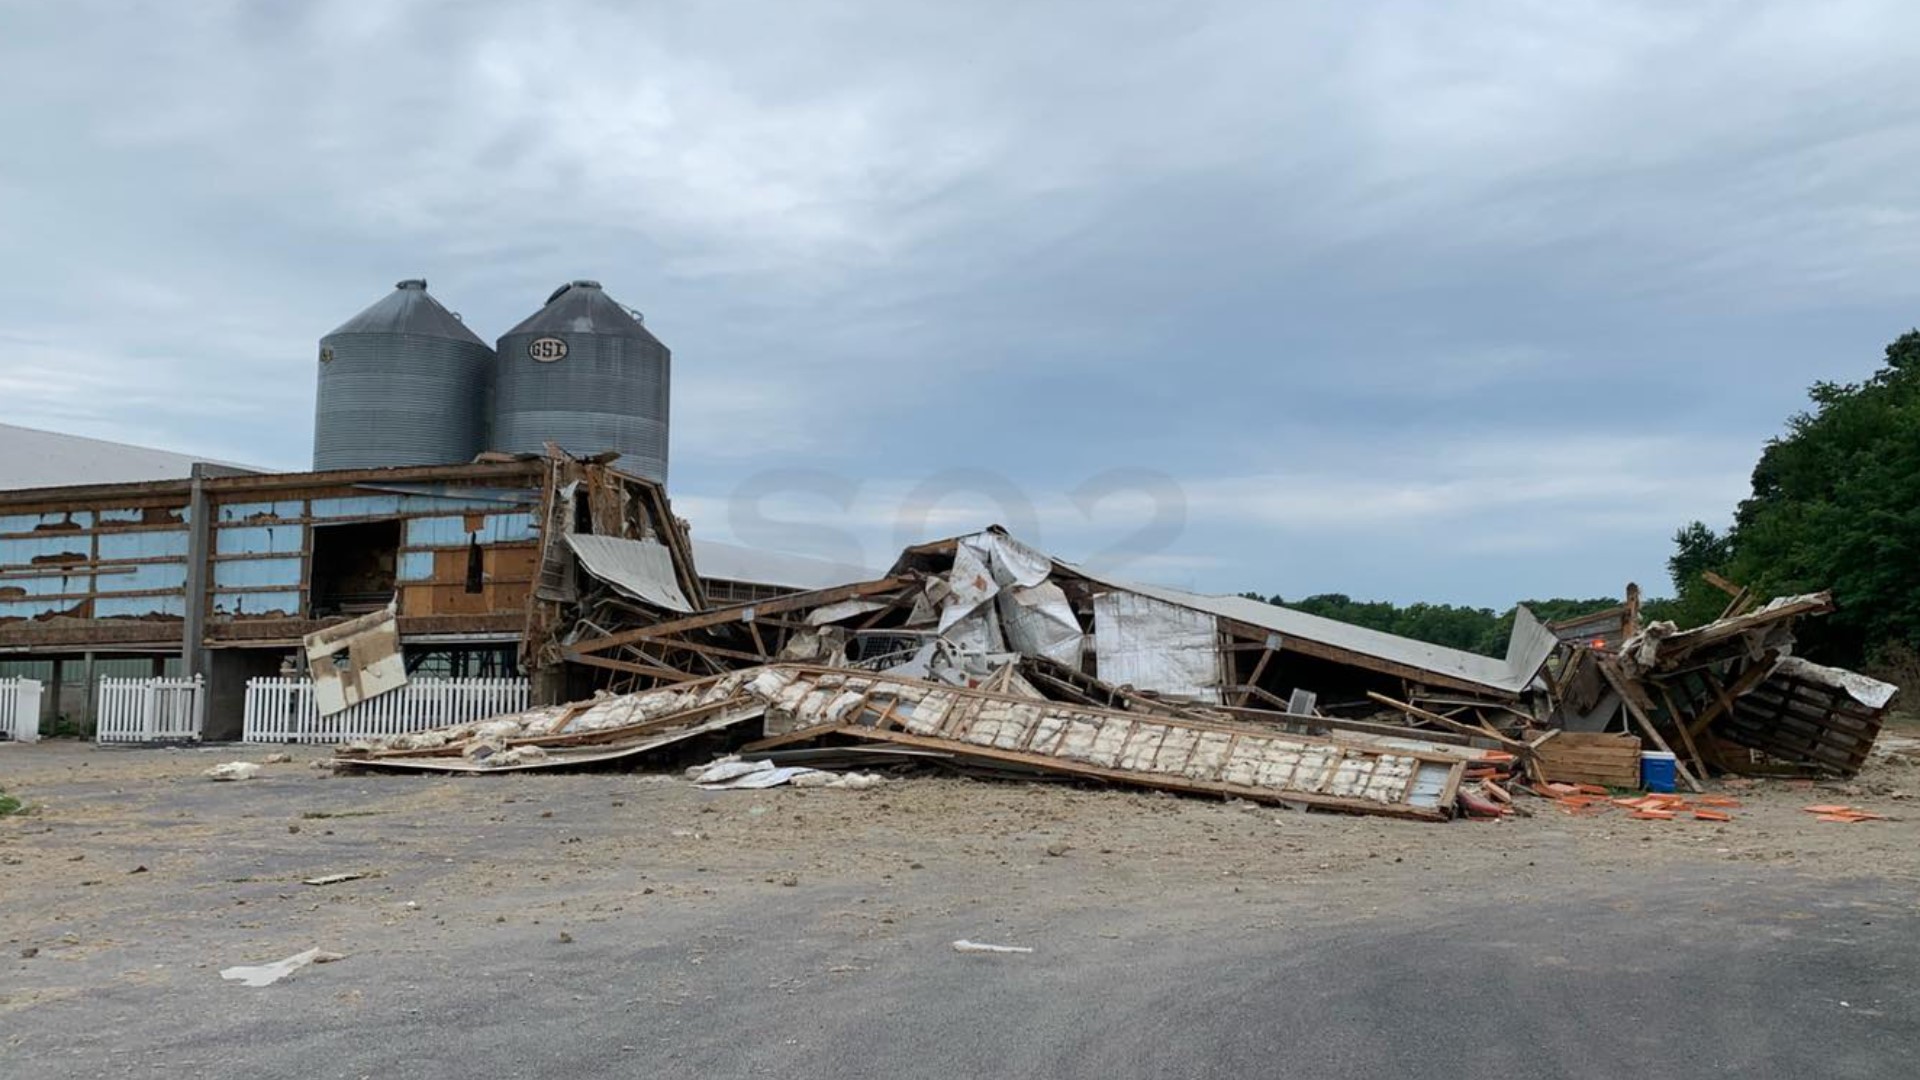 The Adams County Coroner has responded to the chicken barn collapse, and one person has been pronounced dead.